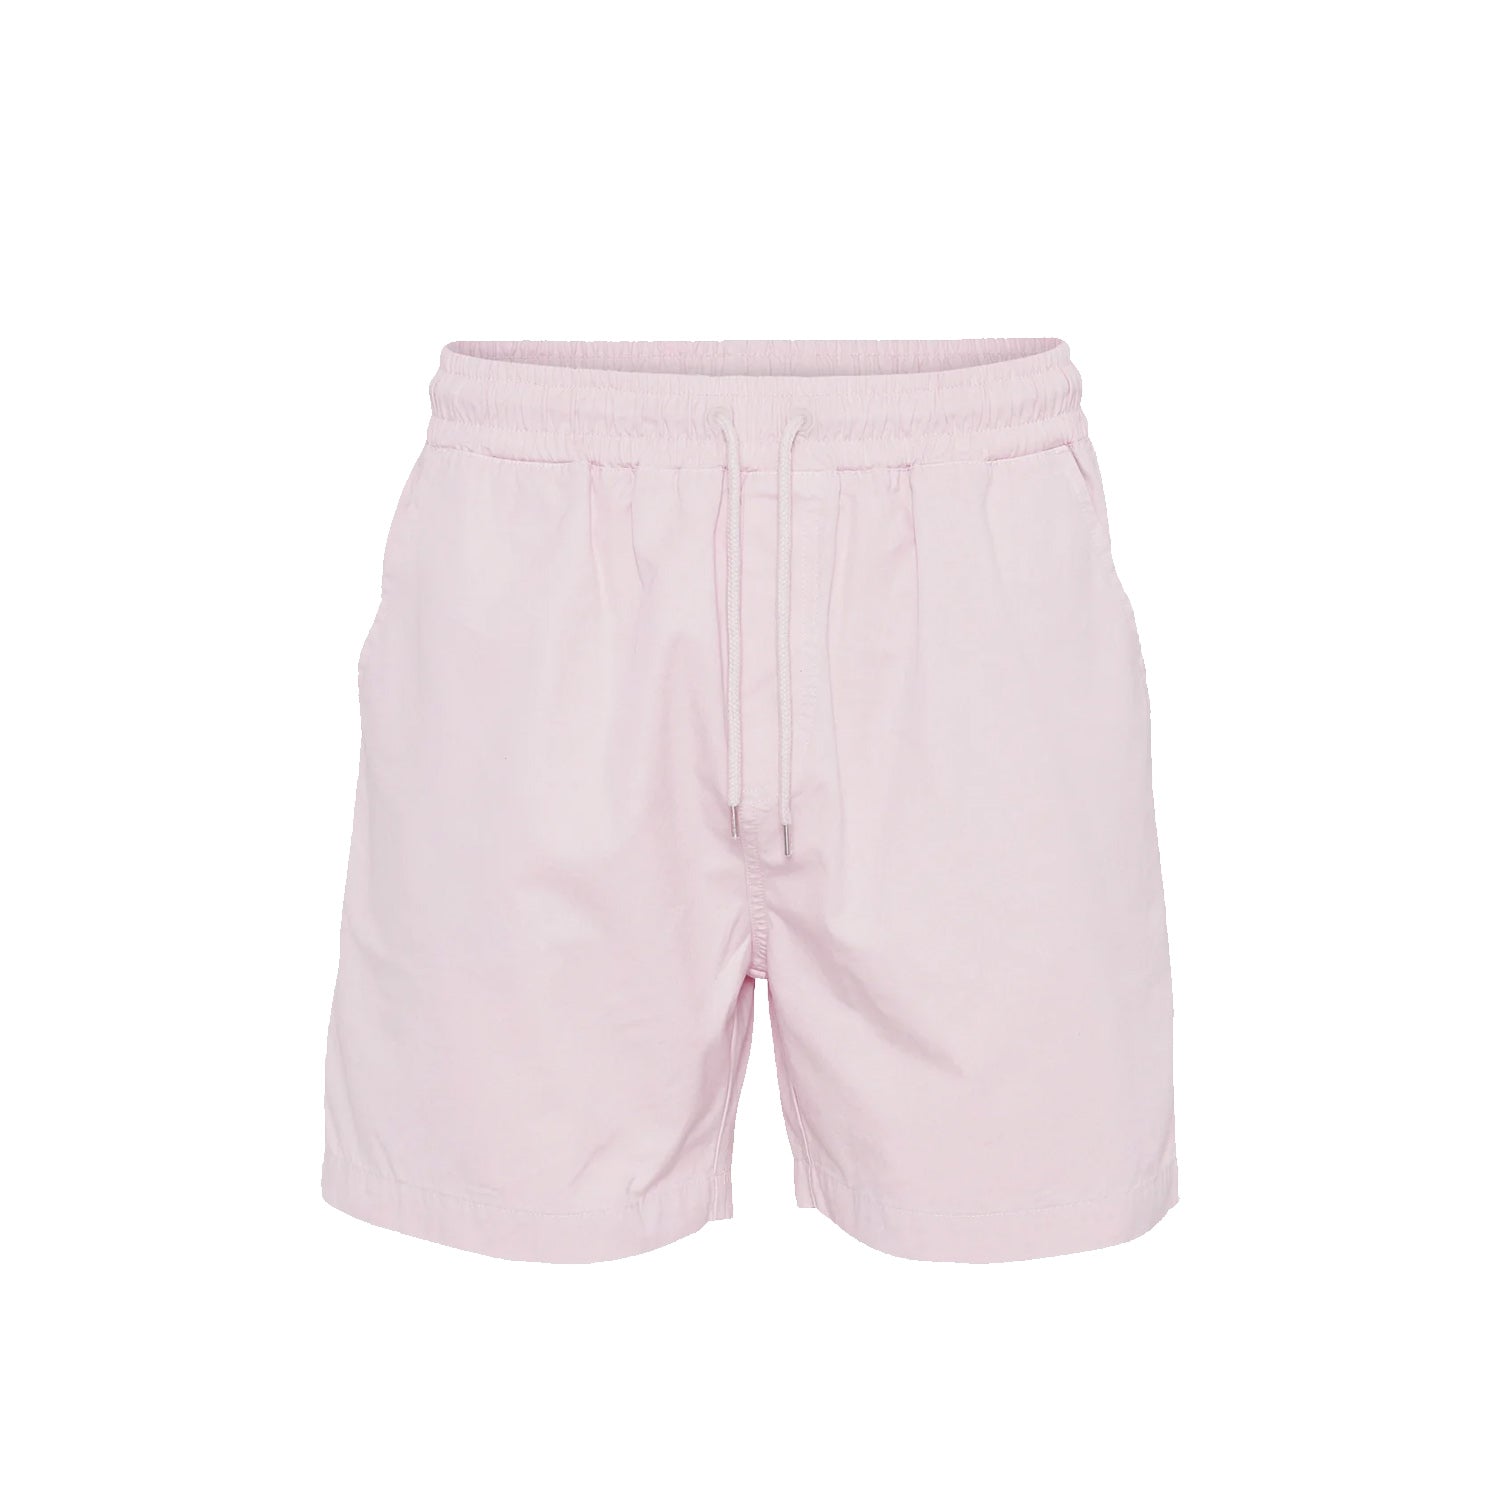 Organic Twill Shorts FADED PINK
Who doesn’t love a short-short? Show off those legs in the organic twill shorts. They’re high-quality and durable, offering you a colorfully cool look for warmer days (though you’re welcome to wear them on the colder days too!).• Unisex Style• 100% Organic Cotton• Environmentally Friendly Dye • PETA Approved Vegan• Pre-washed• Garment Dyed• Anti-pilling• 200g. Fabric• Made in Portugal*This style is unisex - we recommend women to go one size down COLORFUL STANDARD